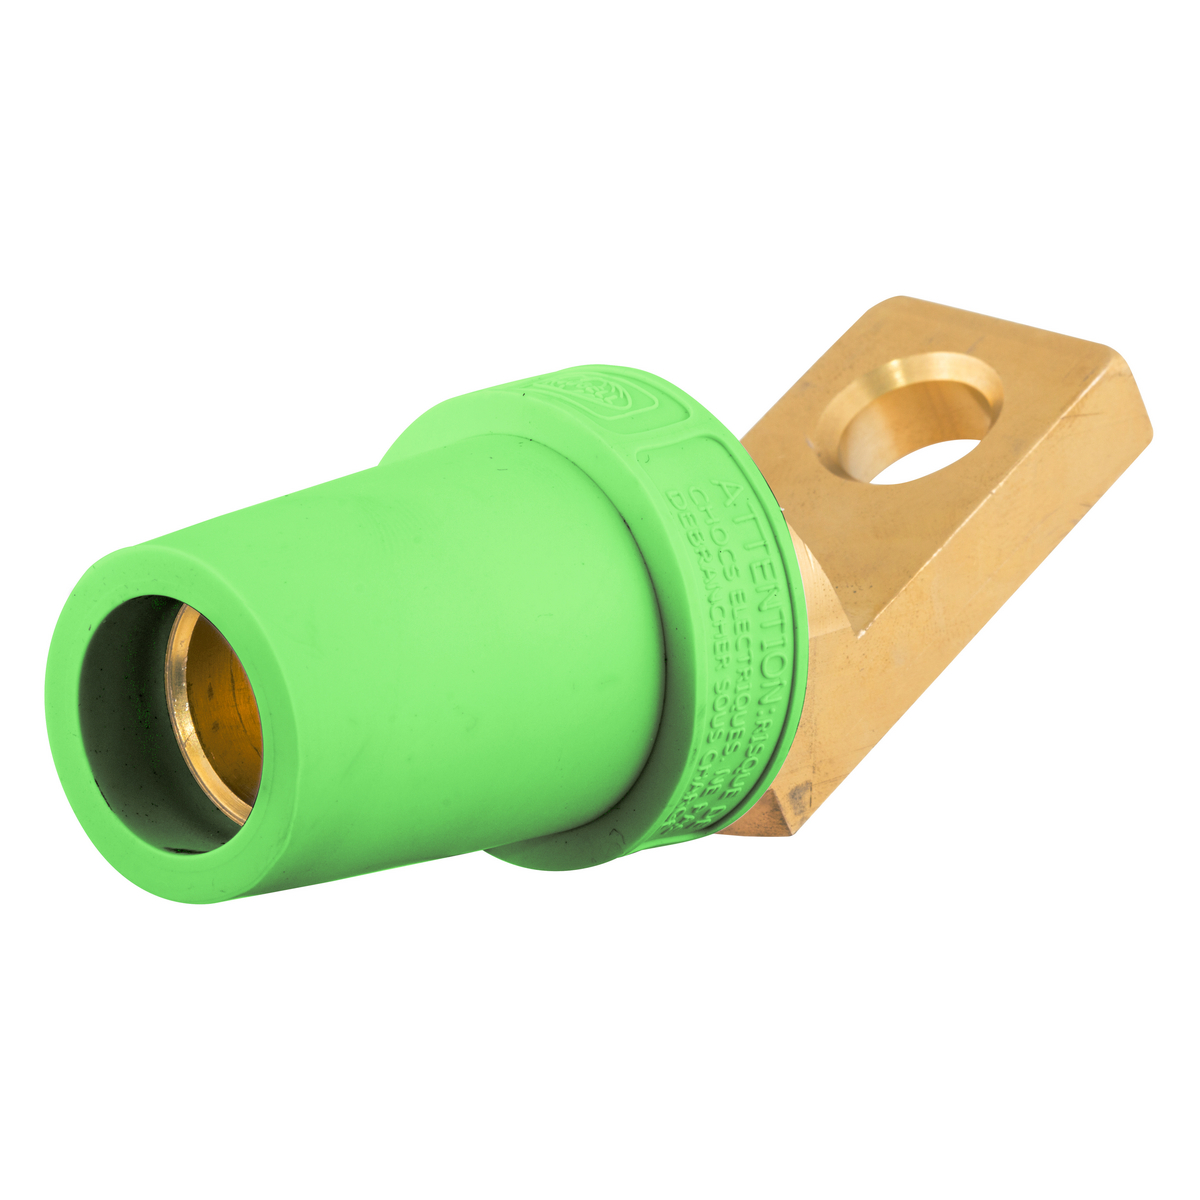 Hubbell Wiring Device Kellems, Single Pole Products, 300/400A Series,Angled Female, Offset Stud Type, Green